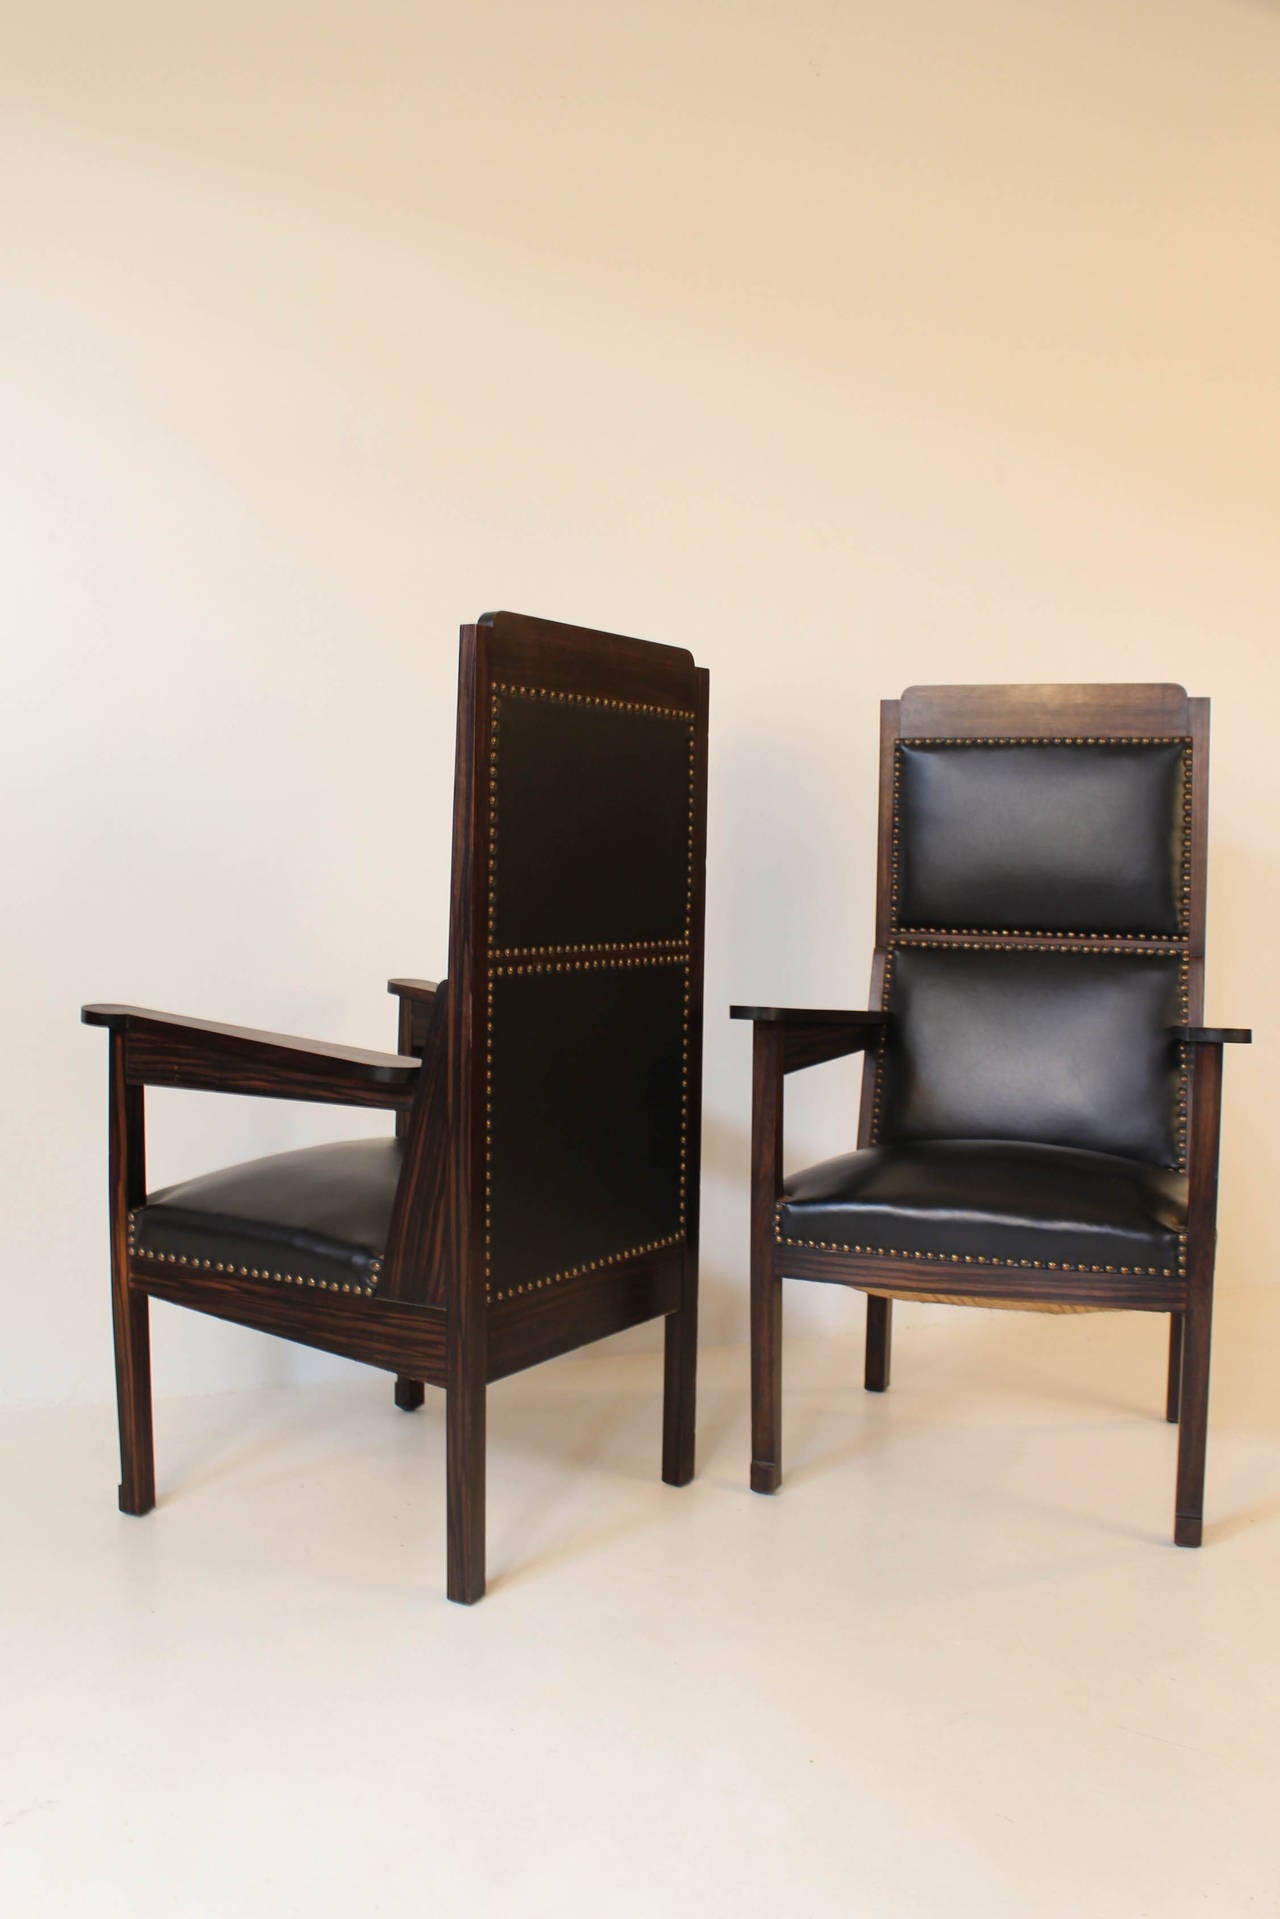 Rare pair of solid Macassar ebony Arts & Crafts armchairs by Hendrik Petrus
Berlage.
The armchairs are upholstered with leatherette.